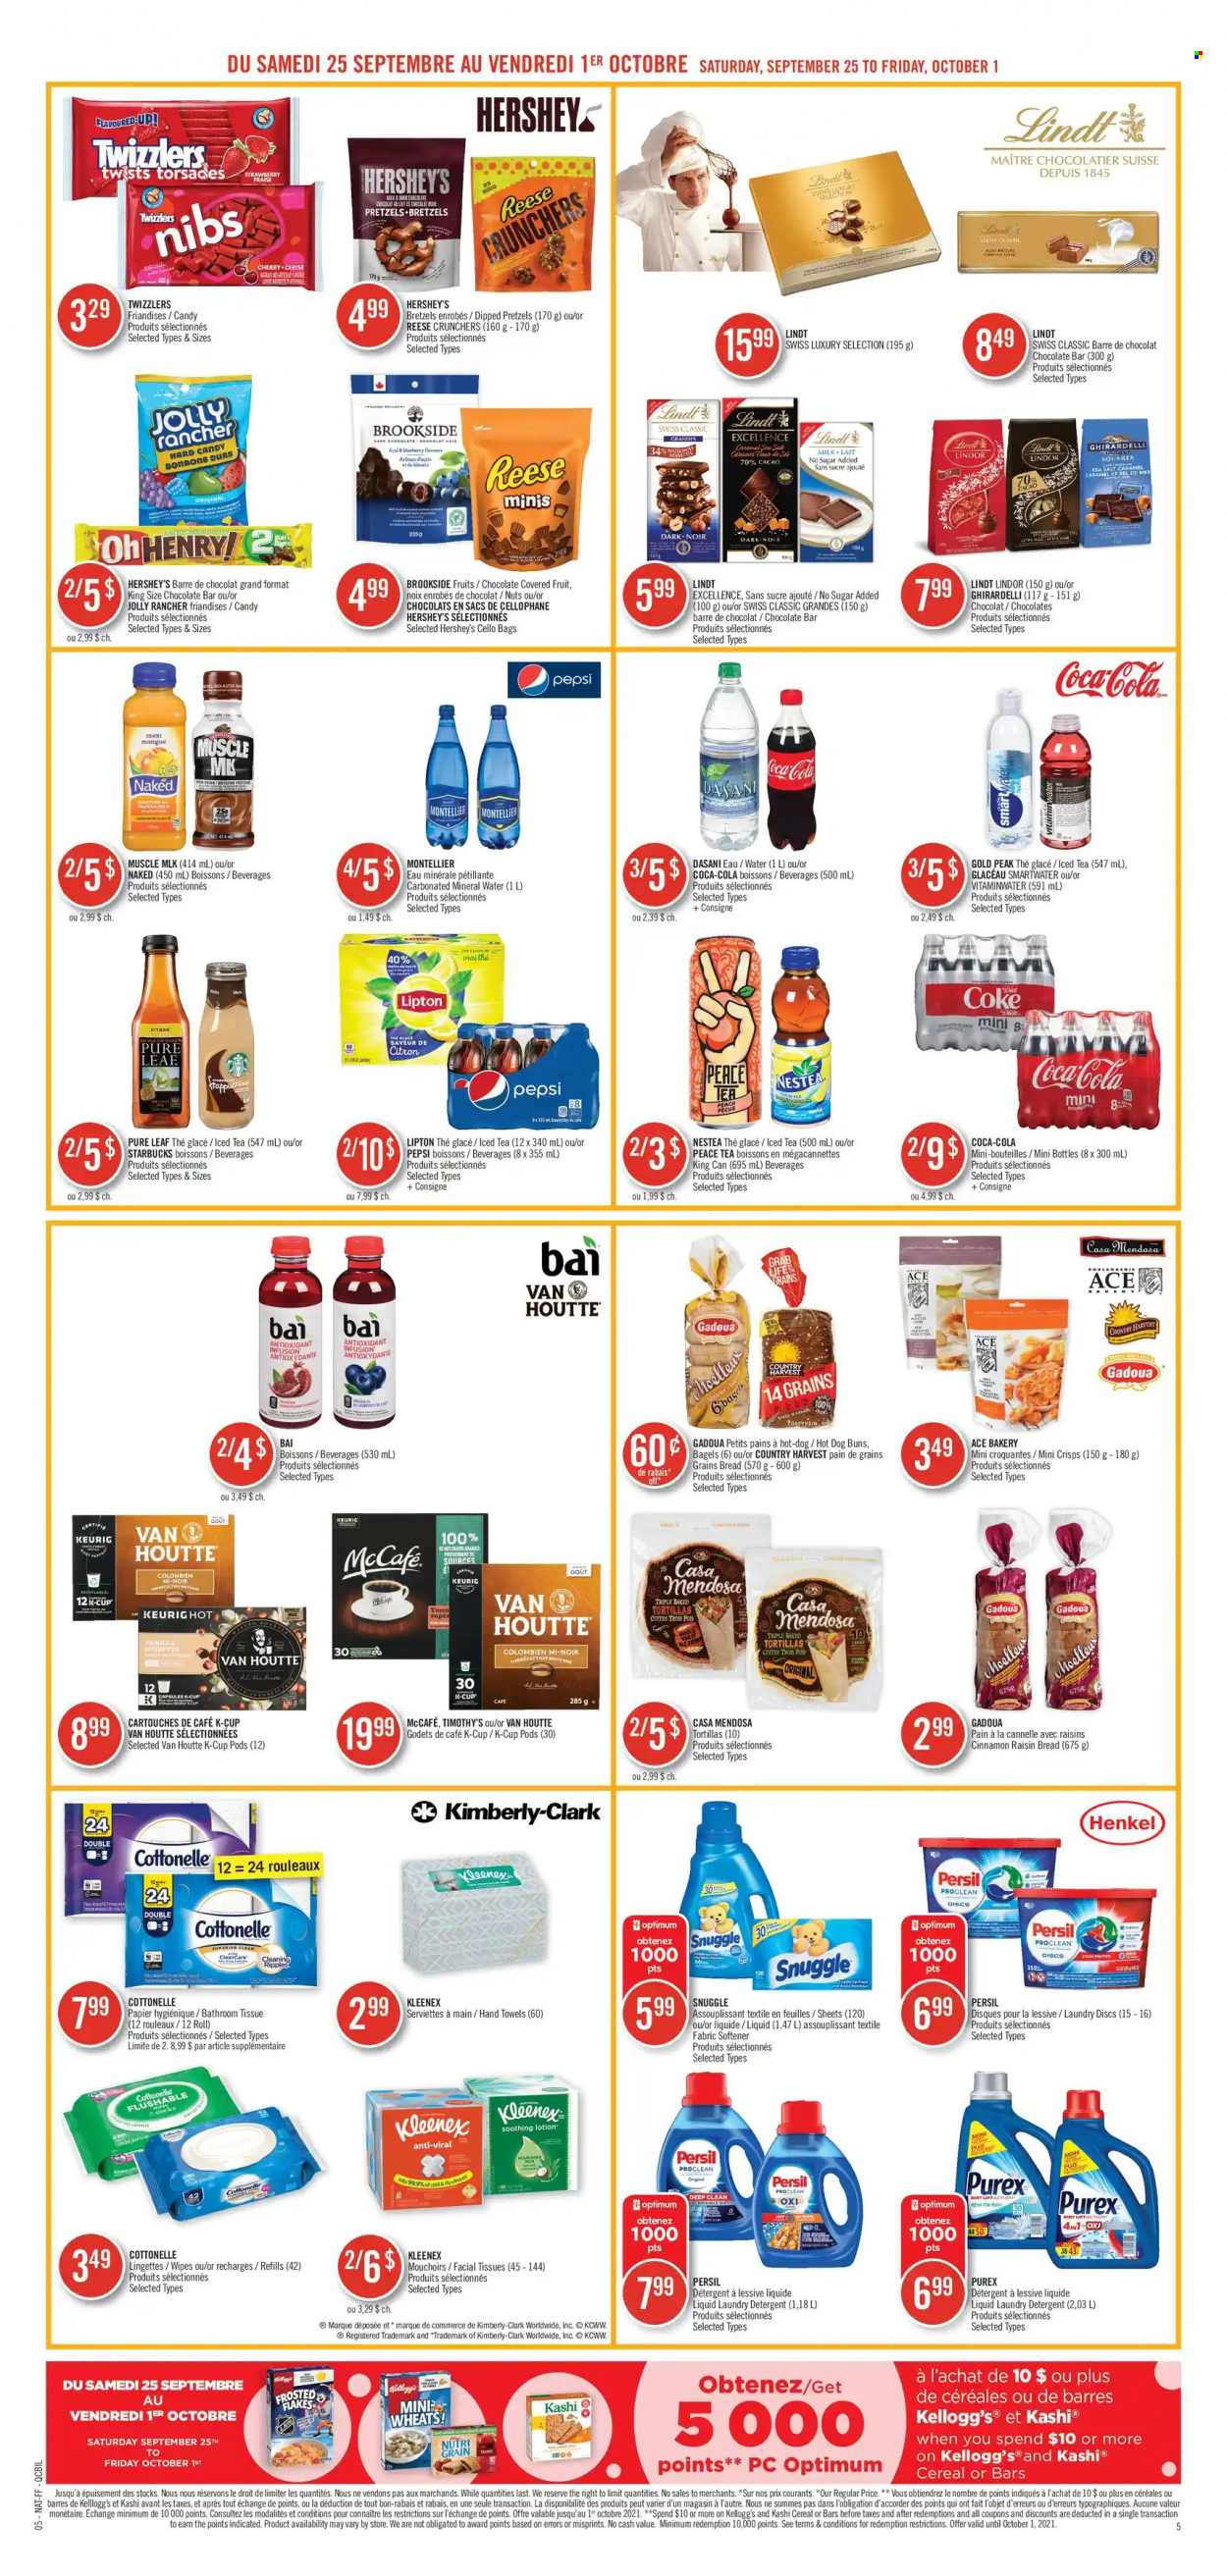 thumbnail - Pharmaprix Flyer - September 25, 2021 - October 01, 2021 - Sales products - bagels, bread, tortillas, pretzels, buns, ACE Bakery, cherries, milk, Hershey's, Country Harvest, Kellogg's, dark chocolate, Ghirardelli, chocolate bar, sea salt, cereals, Frosted Flakes, Nutri-Grain, caramel, dried fruit, Coca-Cola, Pepsi, ice tea, Bai, mineral water, Smartwater, Pure Leaf, coffee capsules, Starbucks, McCafe, K-Cups, Keurig, wipes, bath tissue, Cottonelle, Kleenex, Snuggle, Persil, fabric softener, laundry detergent, Purex, facial tissues, body lotion, Cello, towel, hand towel, detergent, raisins, Lipton, Lindt, Lindor. Page 7.